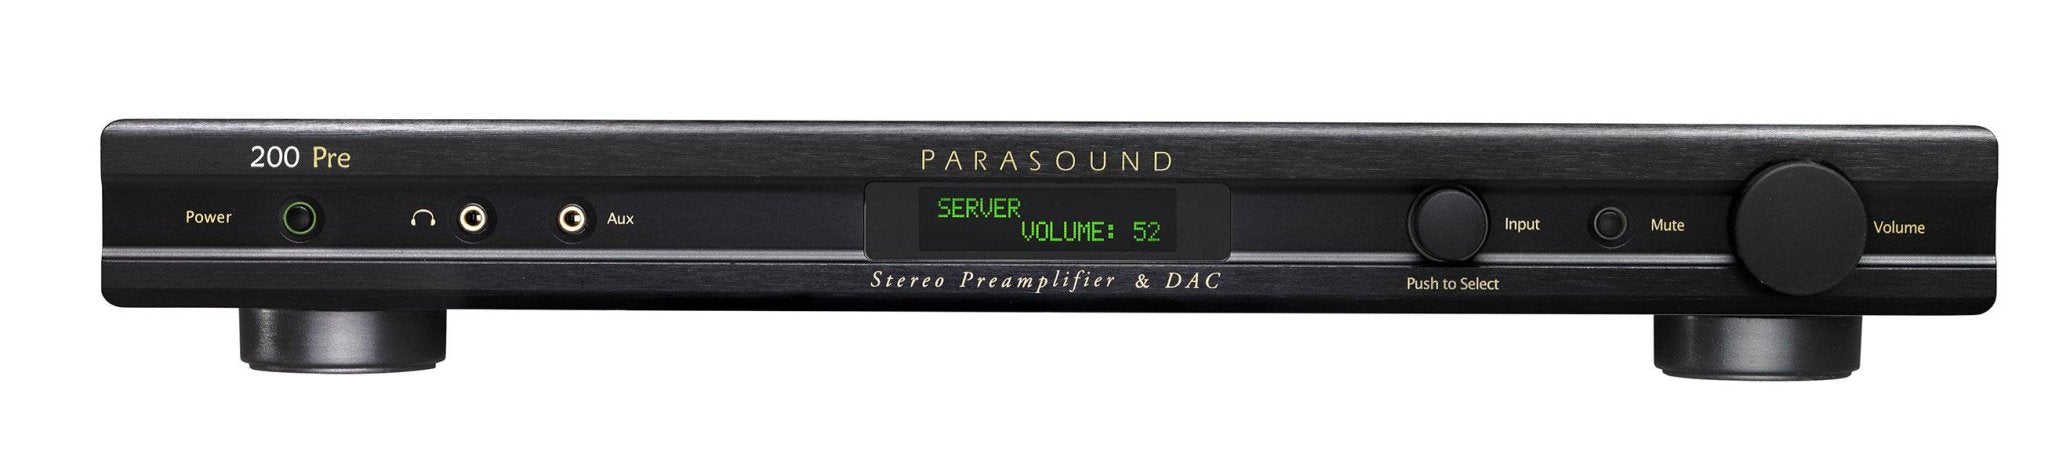 Parasound NewClassic 200 Pre - Stereo Preamplifier - The Audio Co.